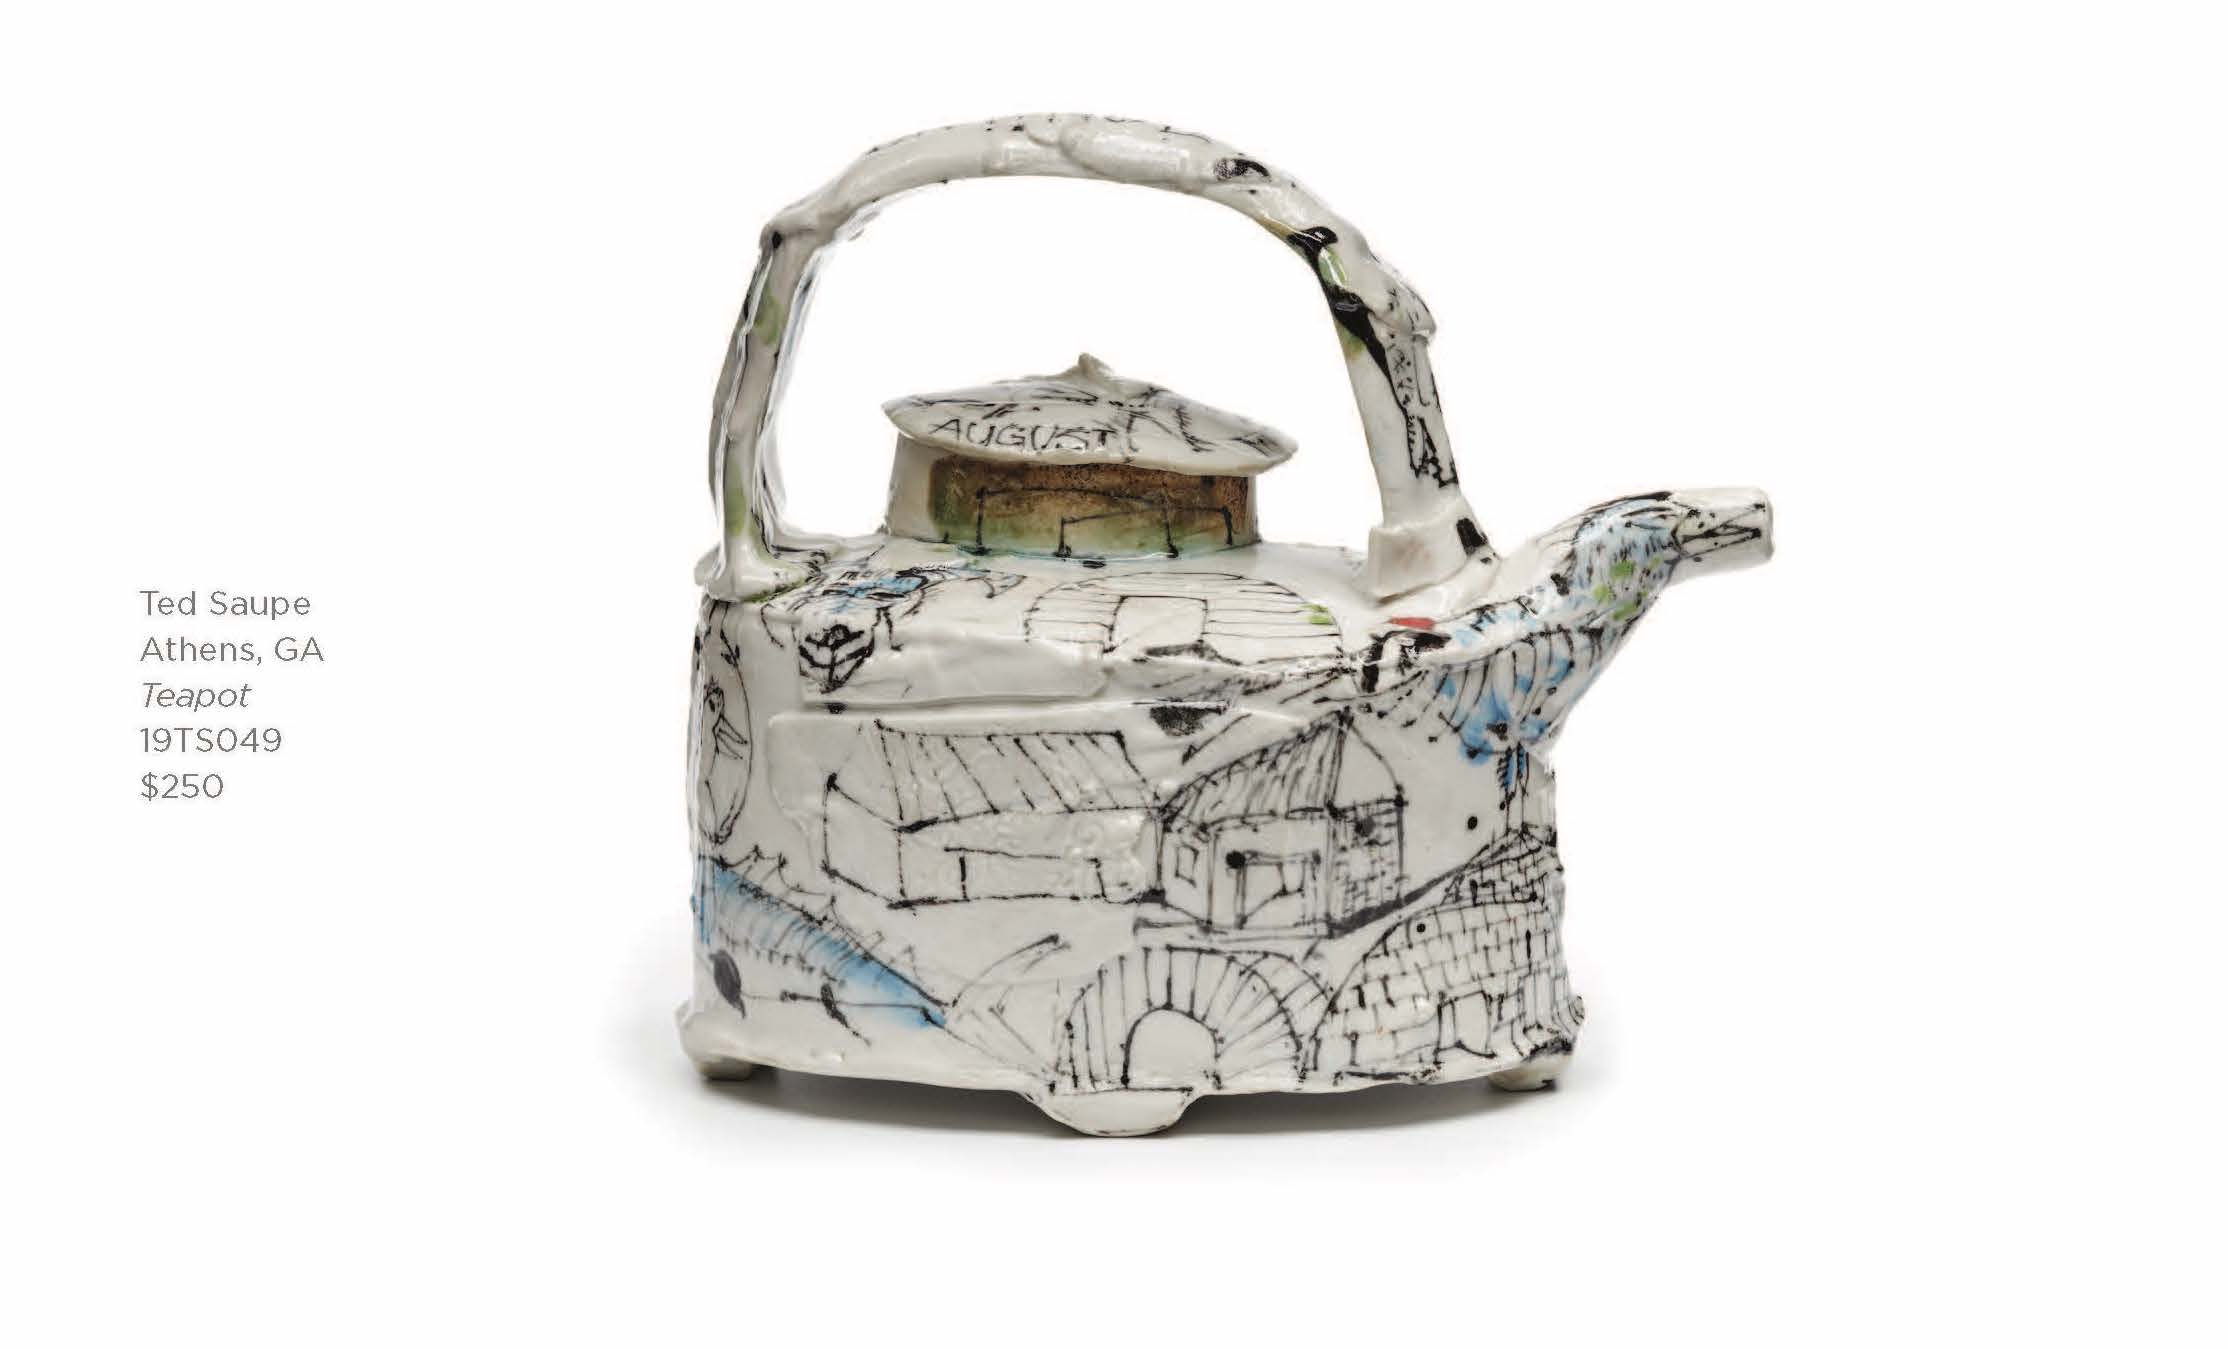 Ted Saupe teapot